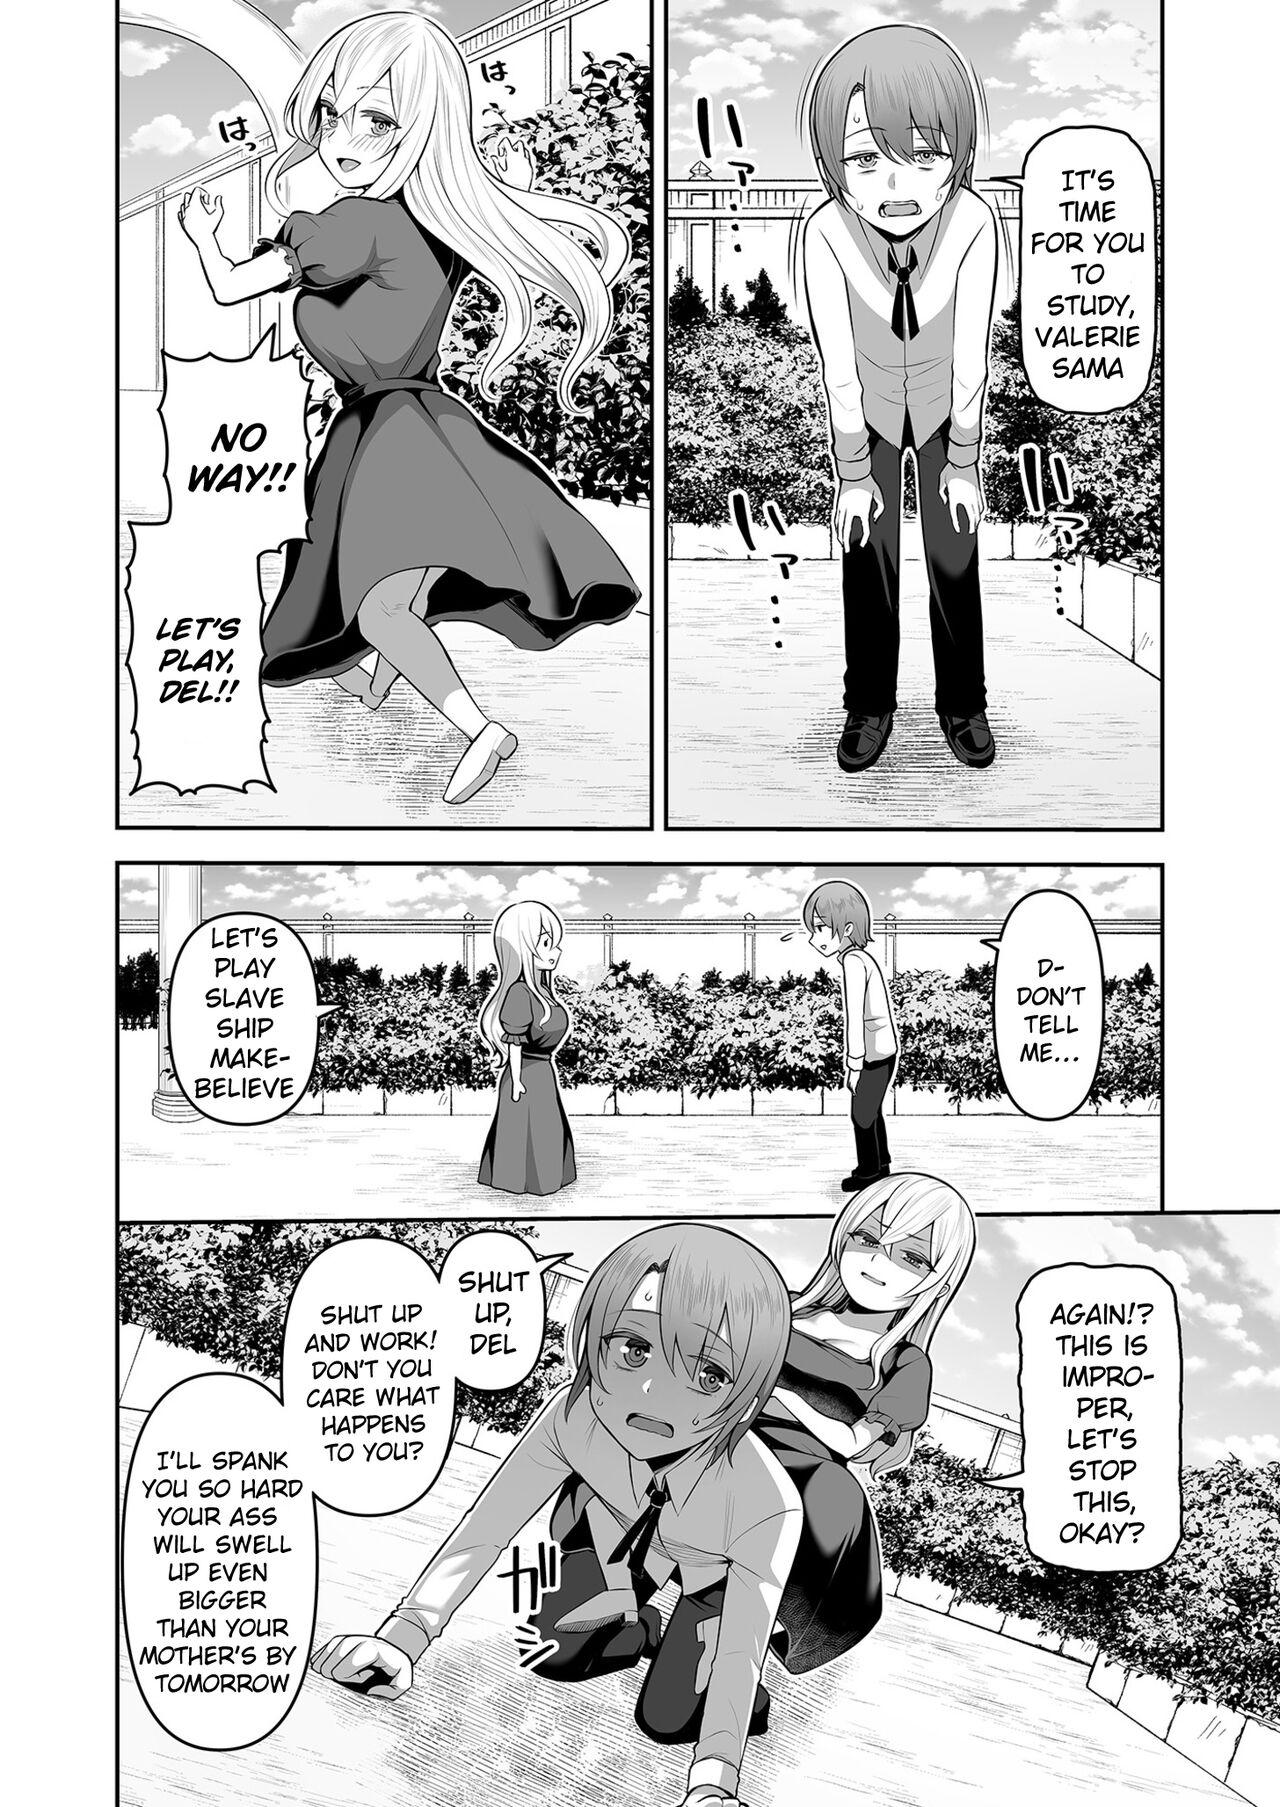 Gay Orgy [Kayumidome] Valerie Monogatari ~Oujo-sama wa Yaritai Houdai!?~ Ch1/ The Story of Valerie ~The Queen Gets To Fuck As Much As She Wants!~ Ch.1 [English] {Doujins.com} Stepsister - Page 4